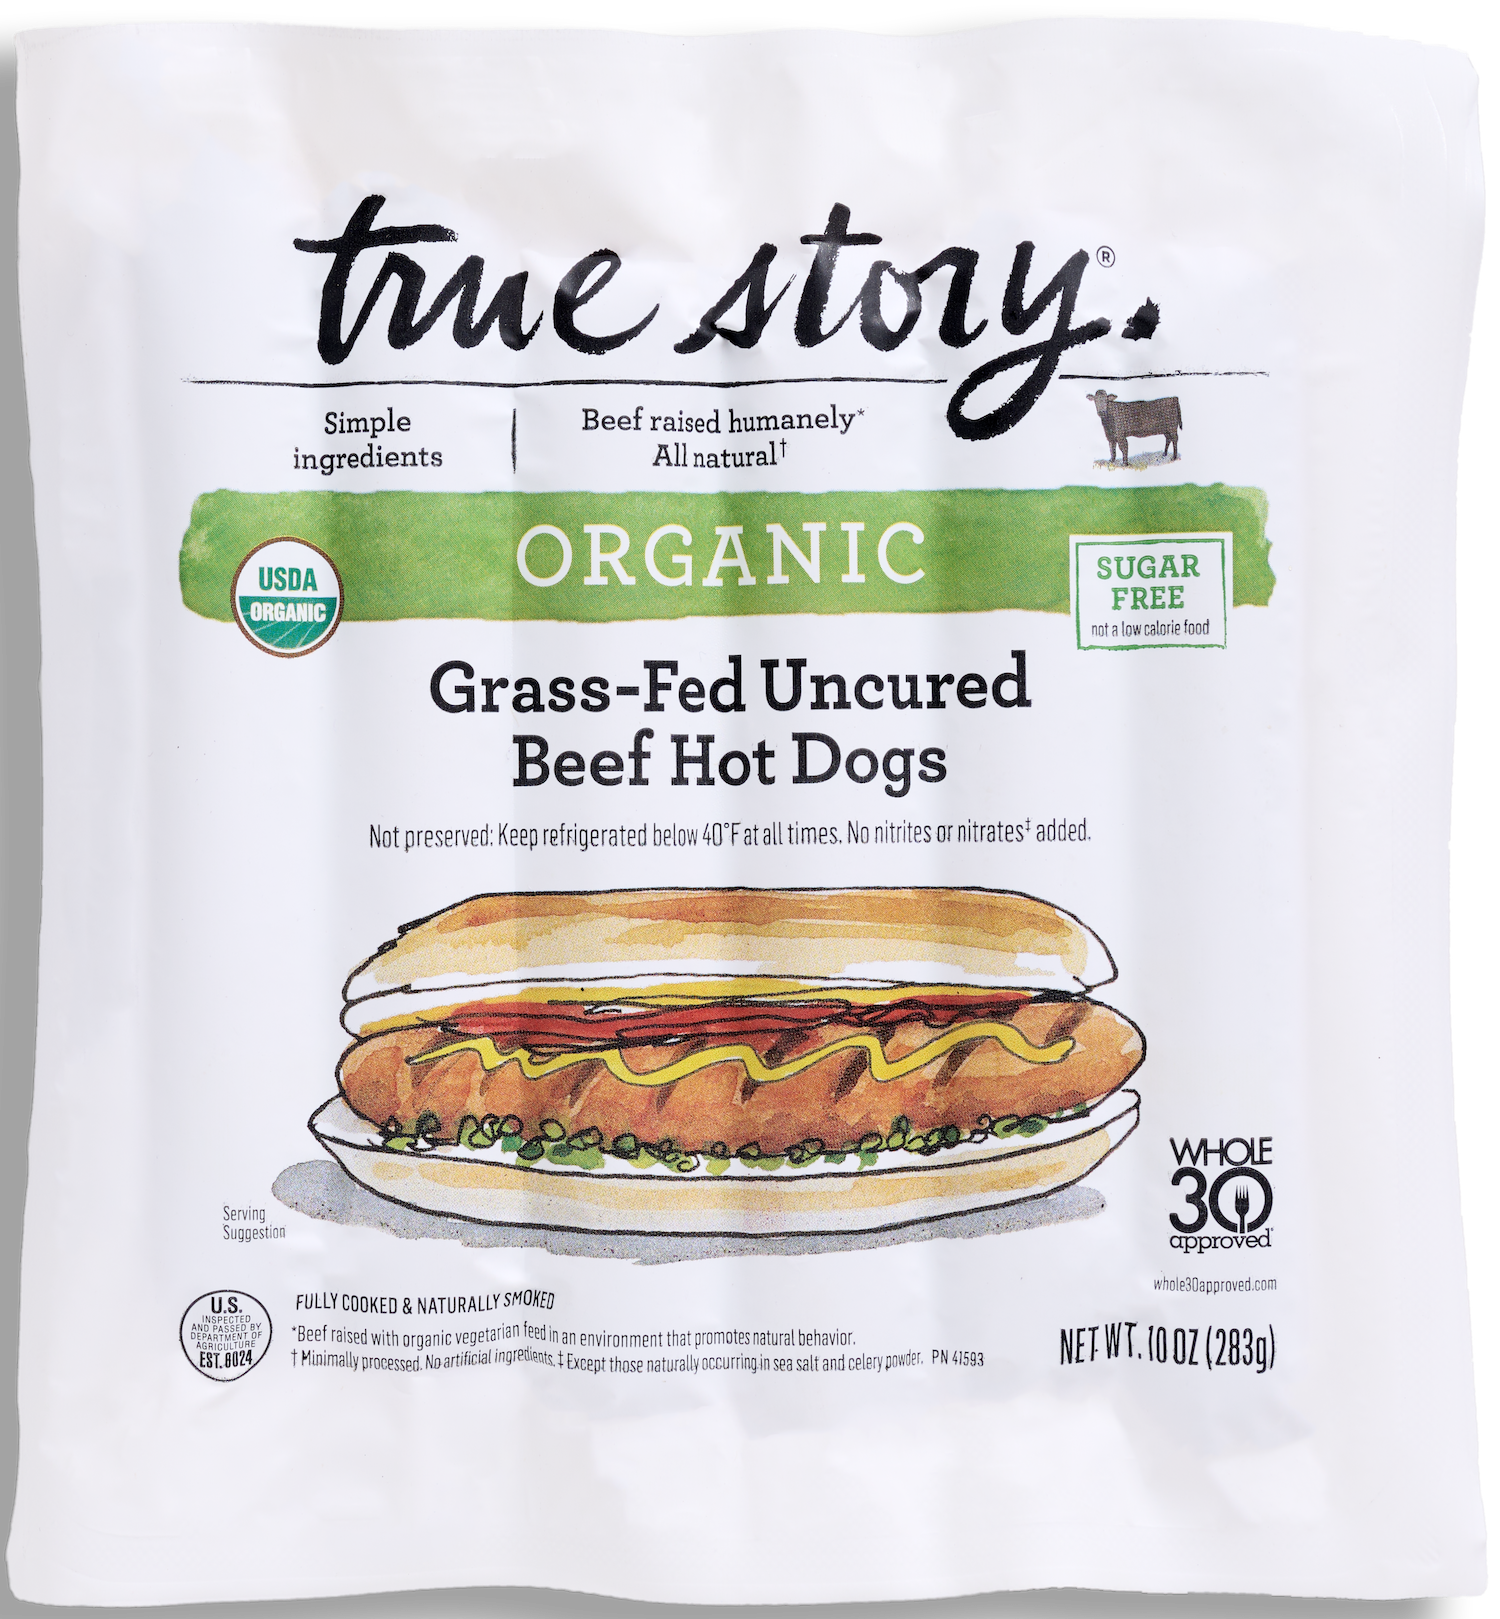 Organic Grass-Fed Uncured Beef Hot Dogs Product Packaging